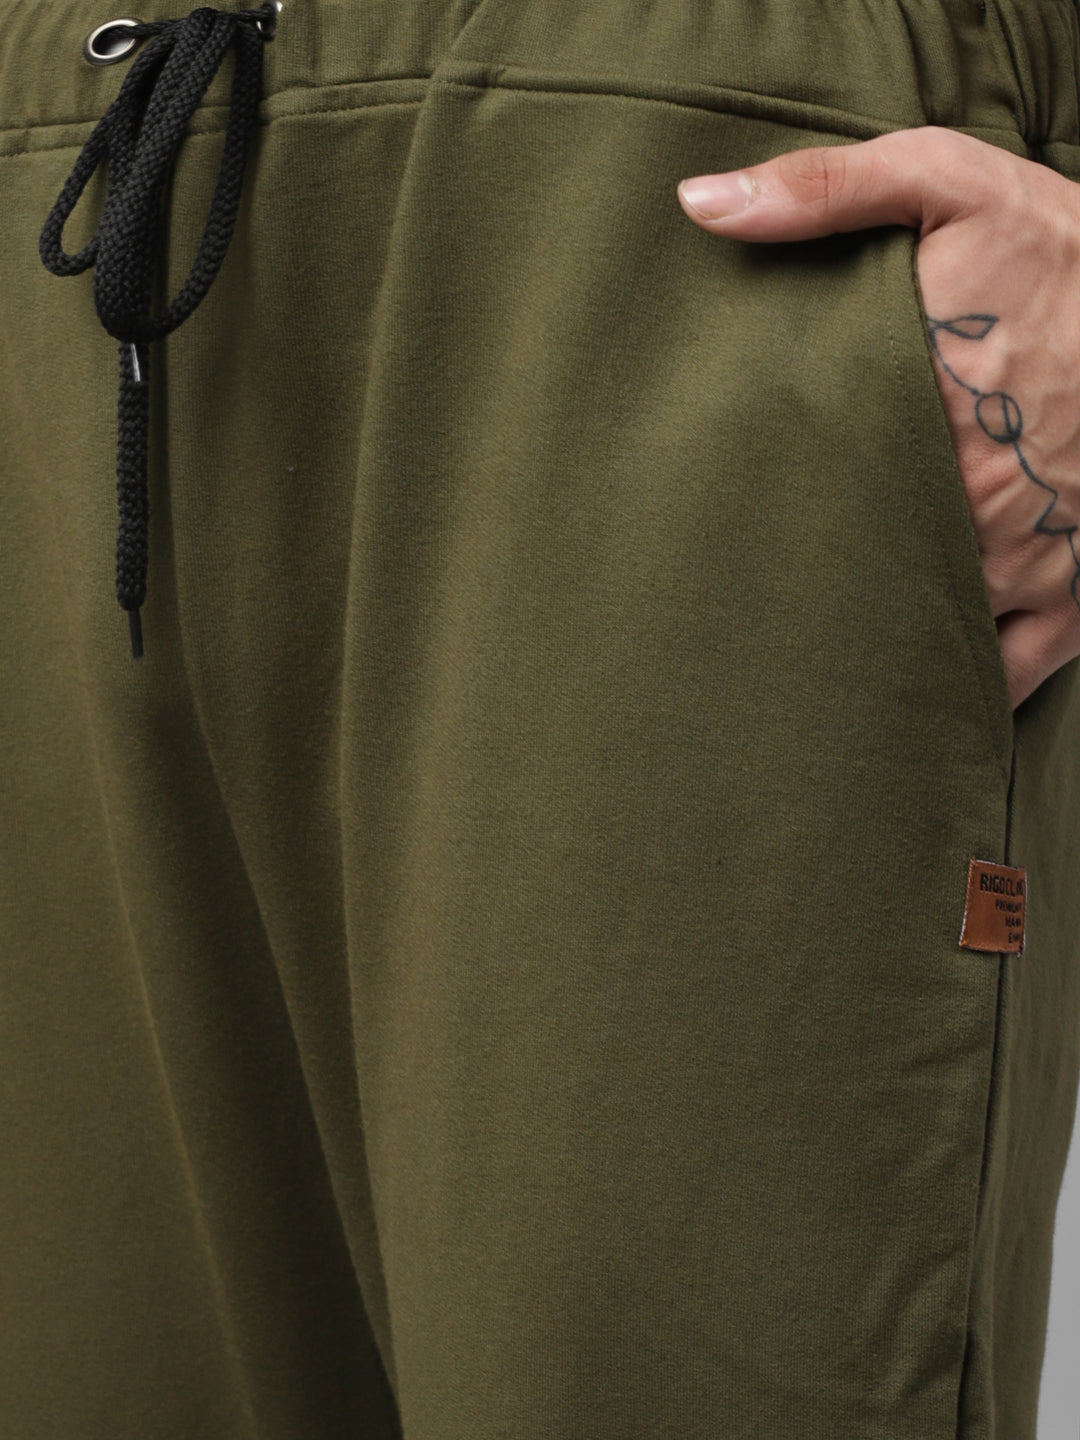 Men's Classic Jogger Pants for Everyday Comfort